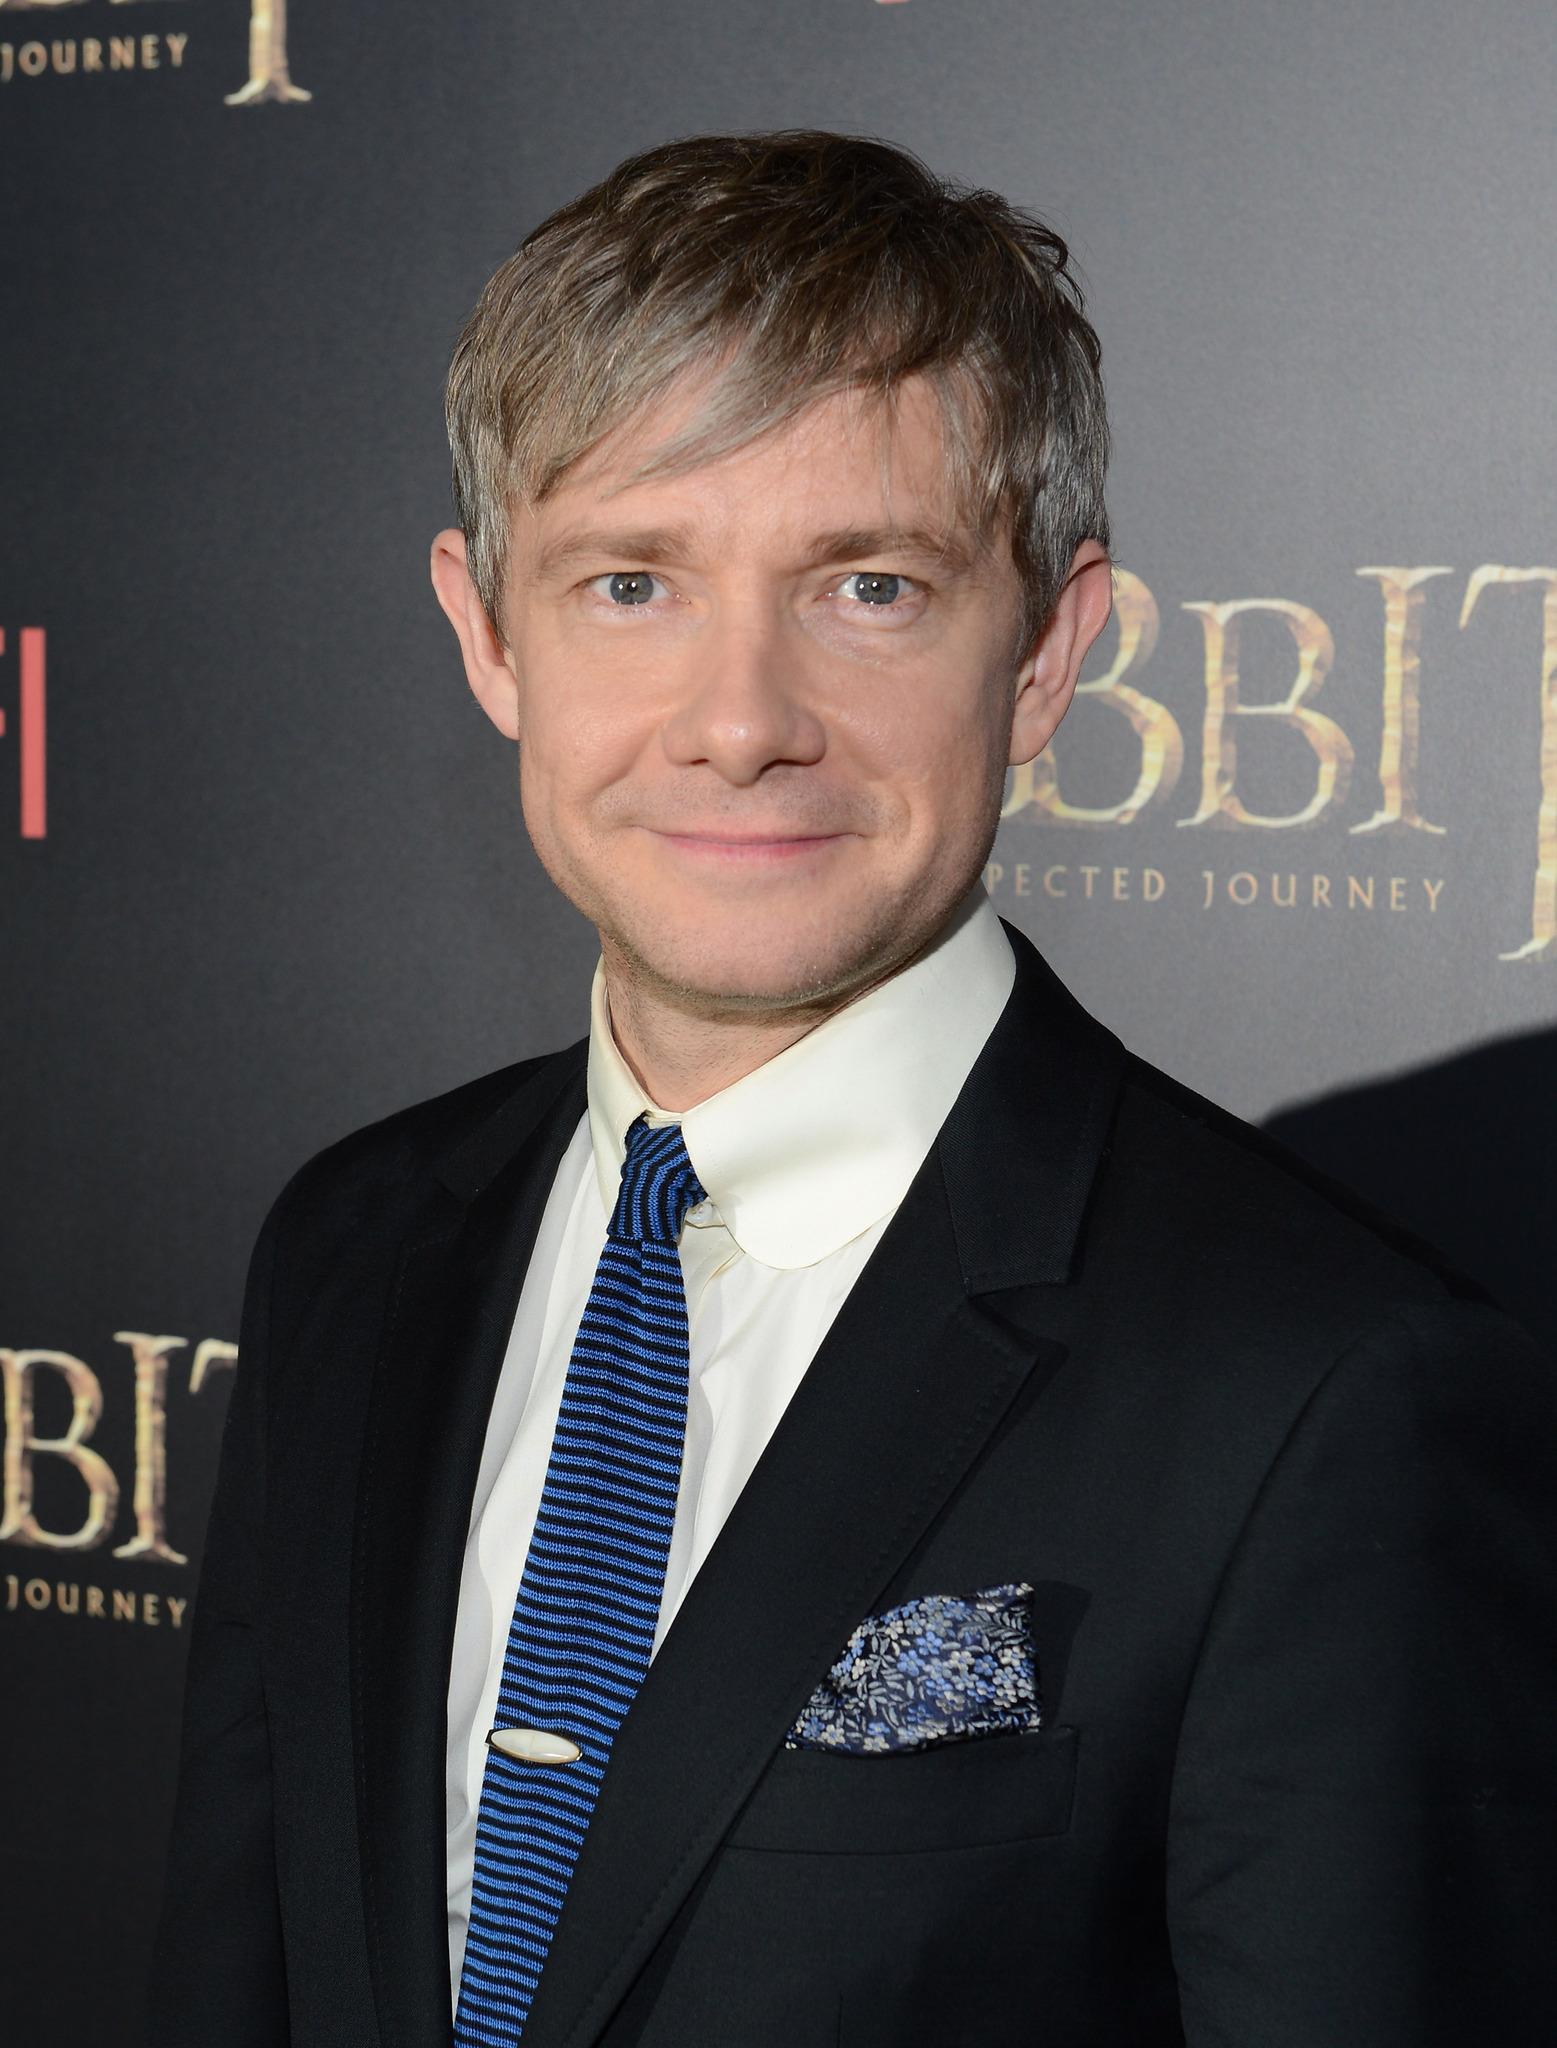 Martin Freeman trying to convince voters to go for ‘Labour'’ for the latest political broadcast